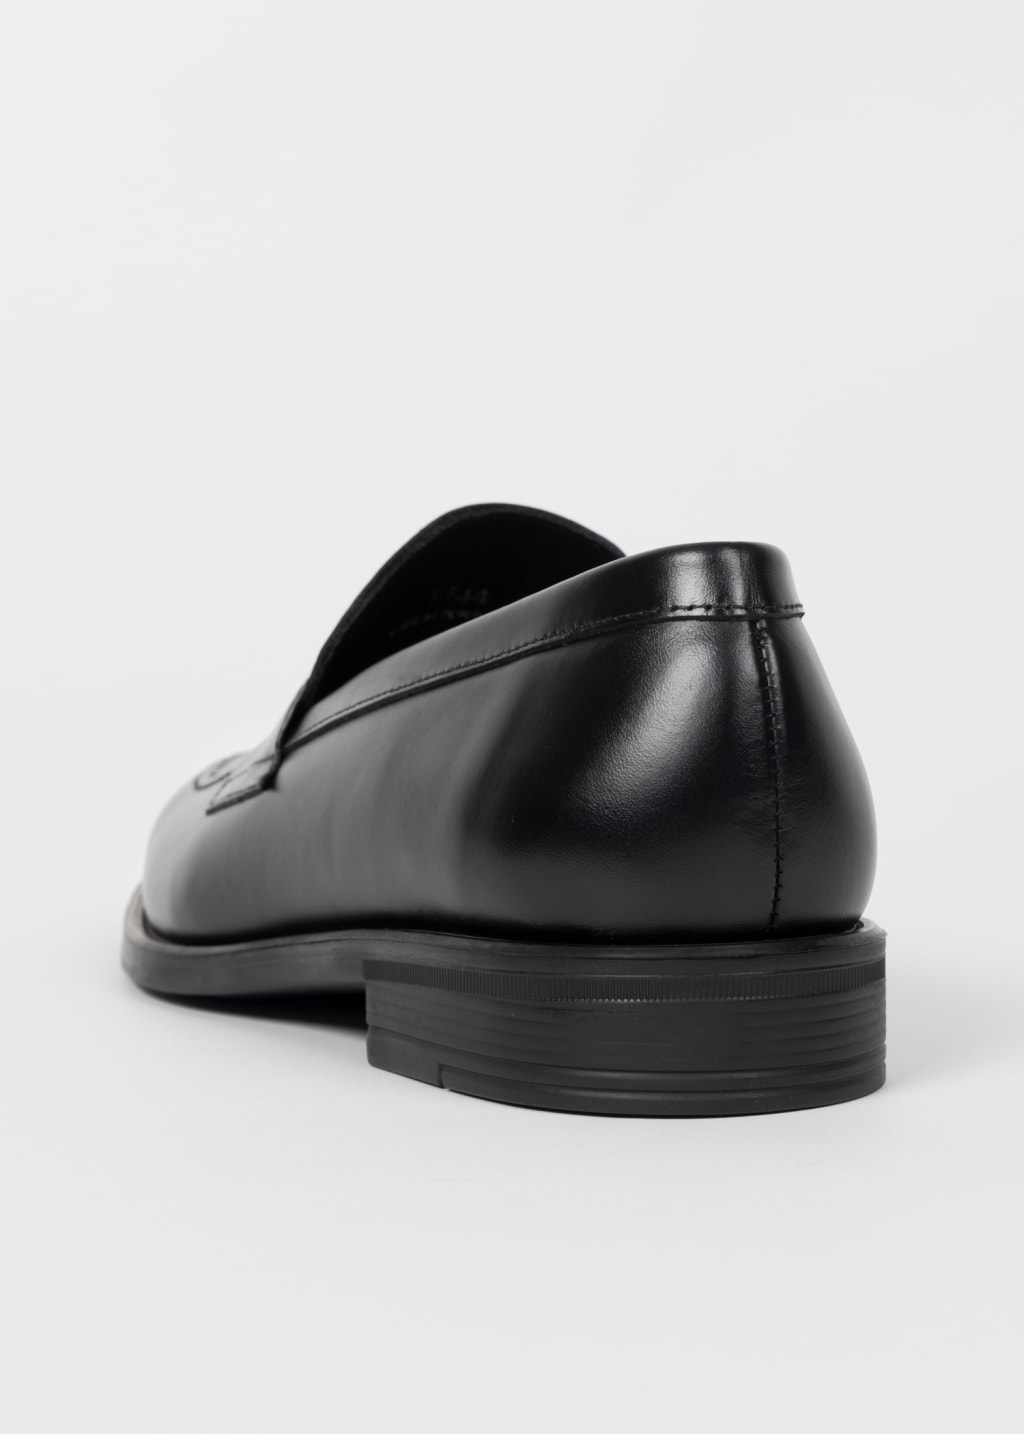 Detail View - Black Leather 'Remi' Loafers Paul Smith